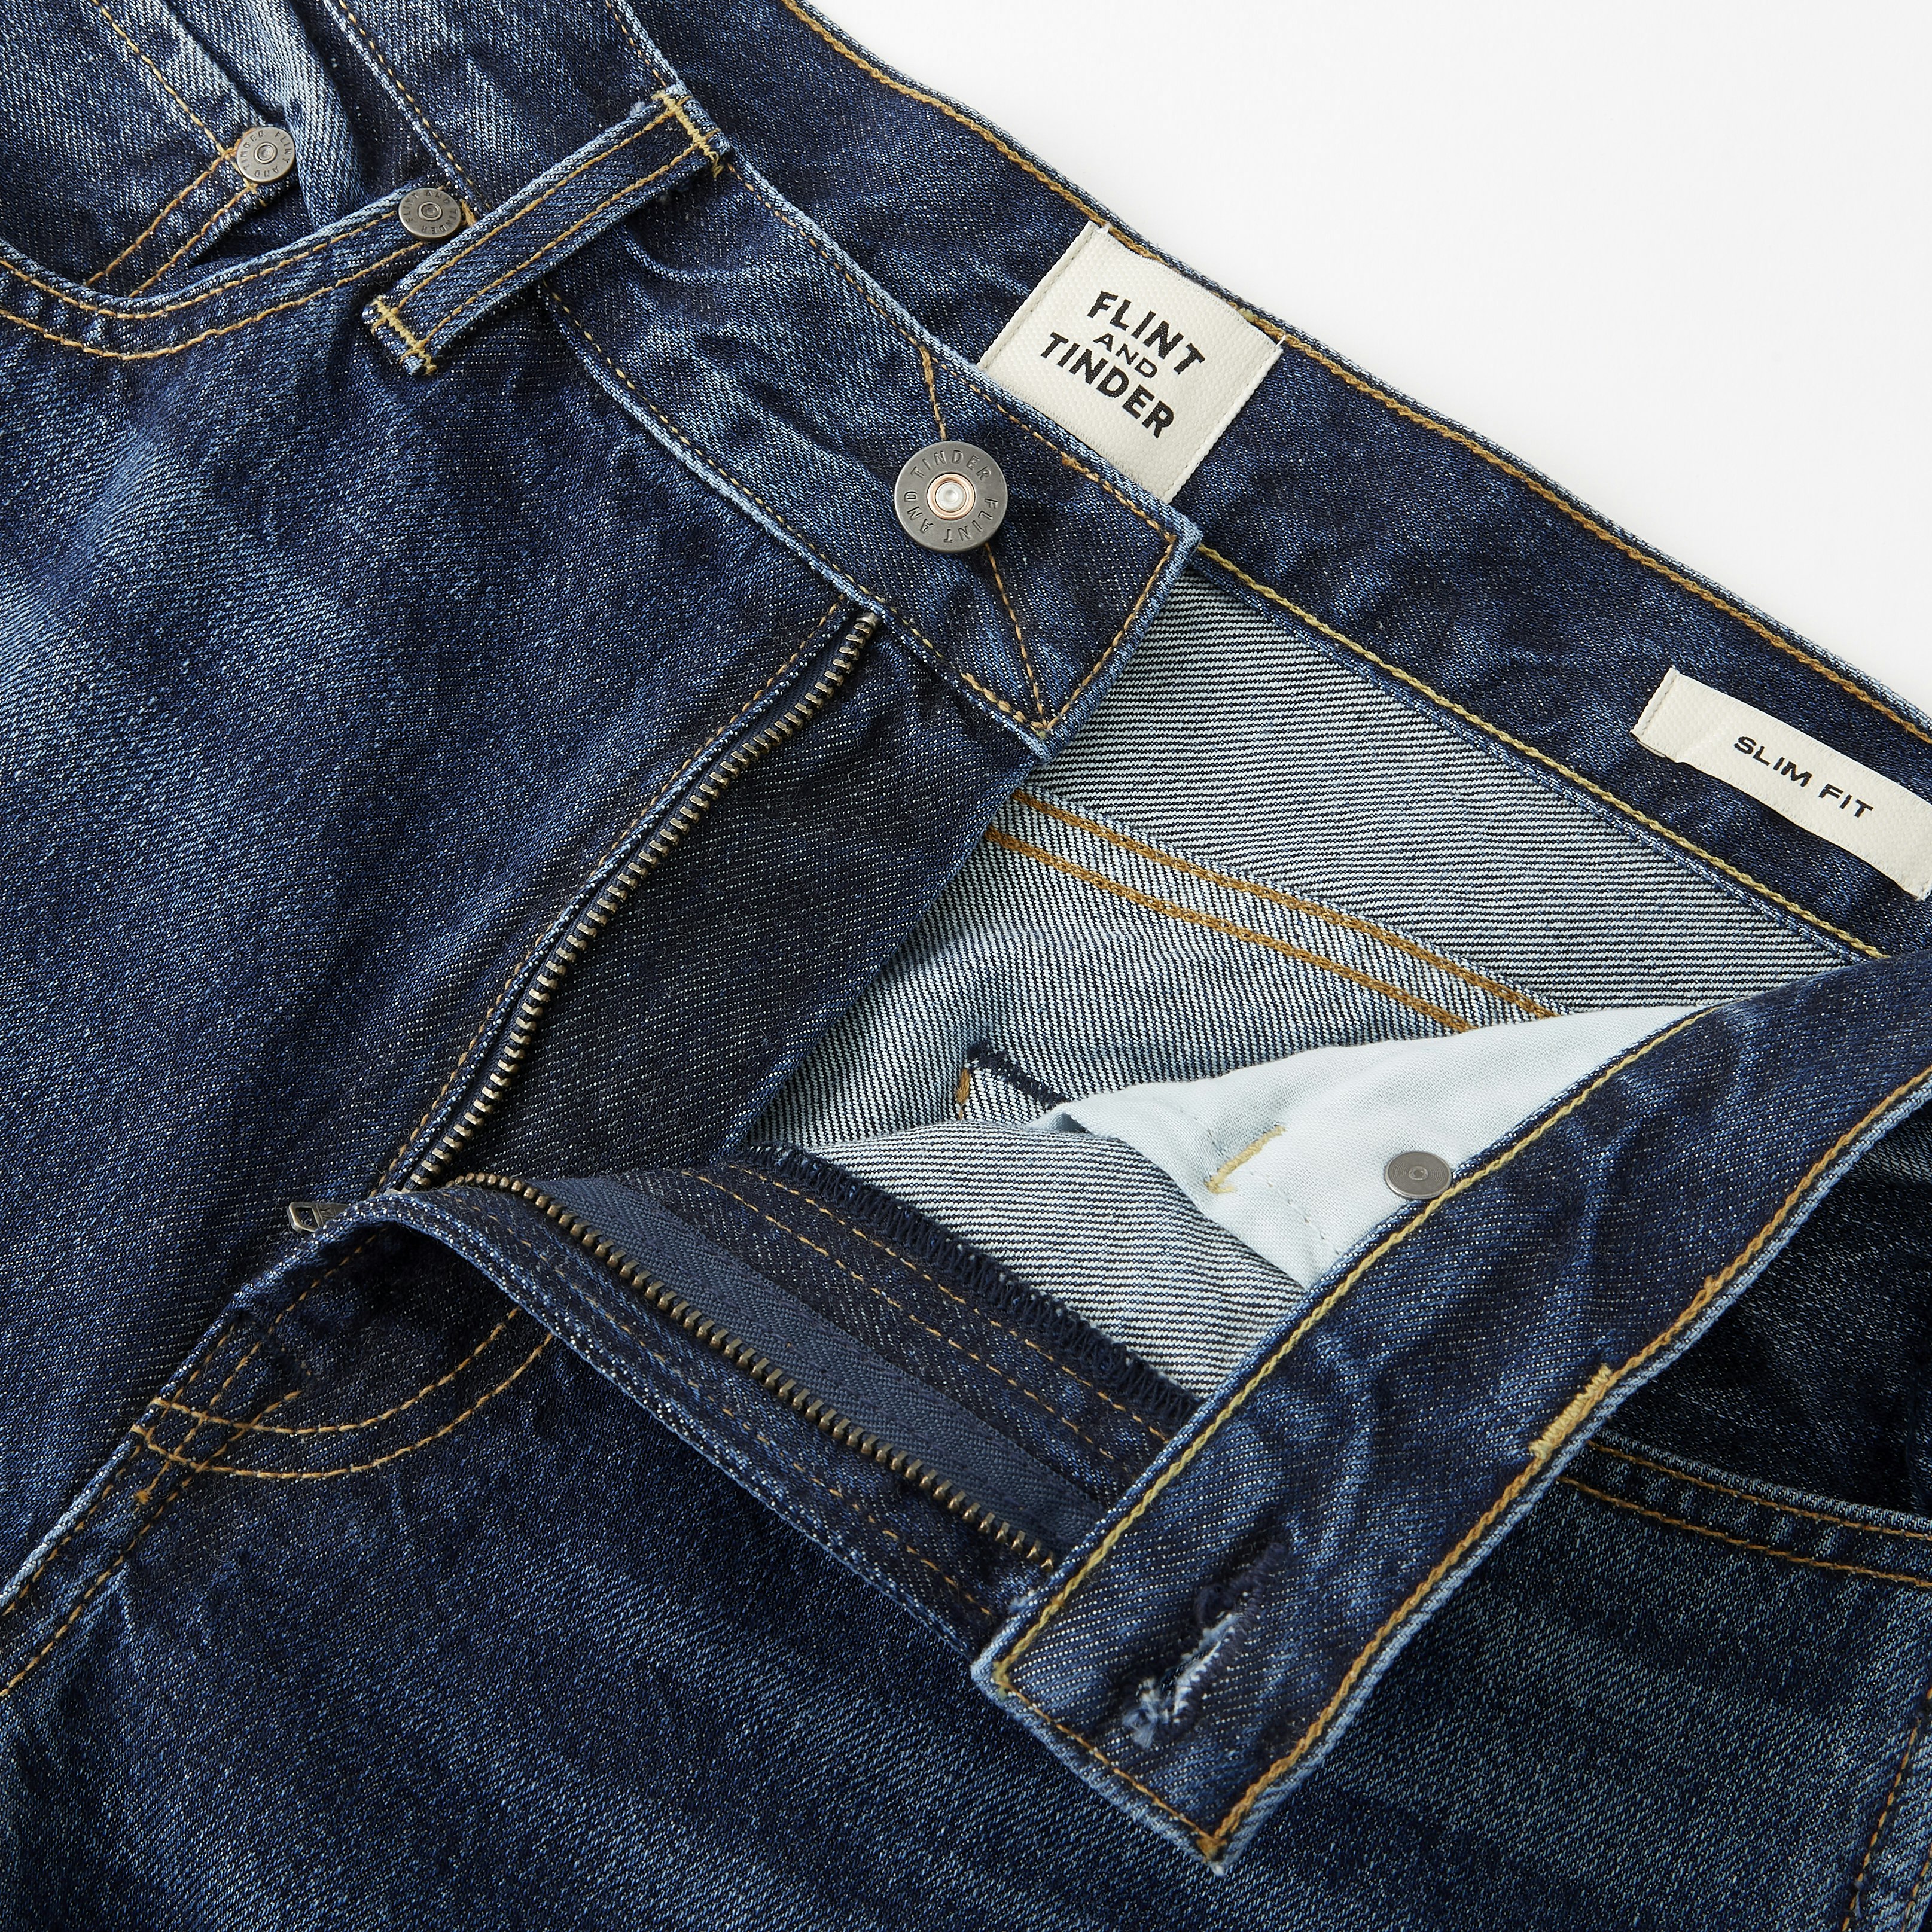 Nama Denim - SUCCESS IS FAILURE TURNED INSIDE OUT #bespoke #namacustommade  . Our NDL202 #21oz fully customizable low tension denim. Brought in from  the iconic Kuroki Mills out of Okayama, Japan this